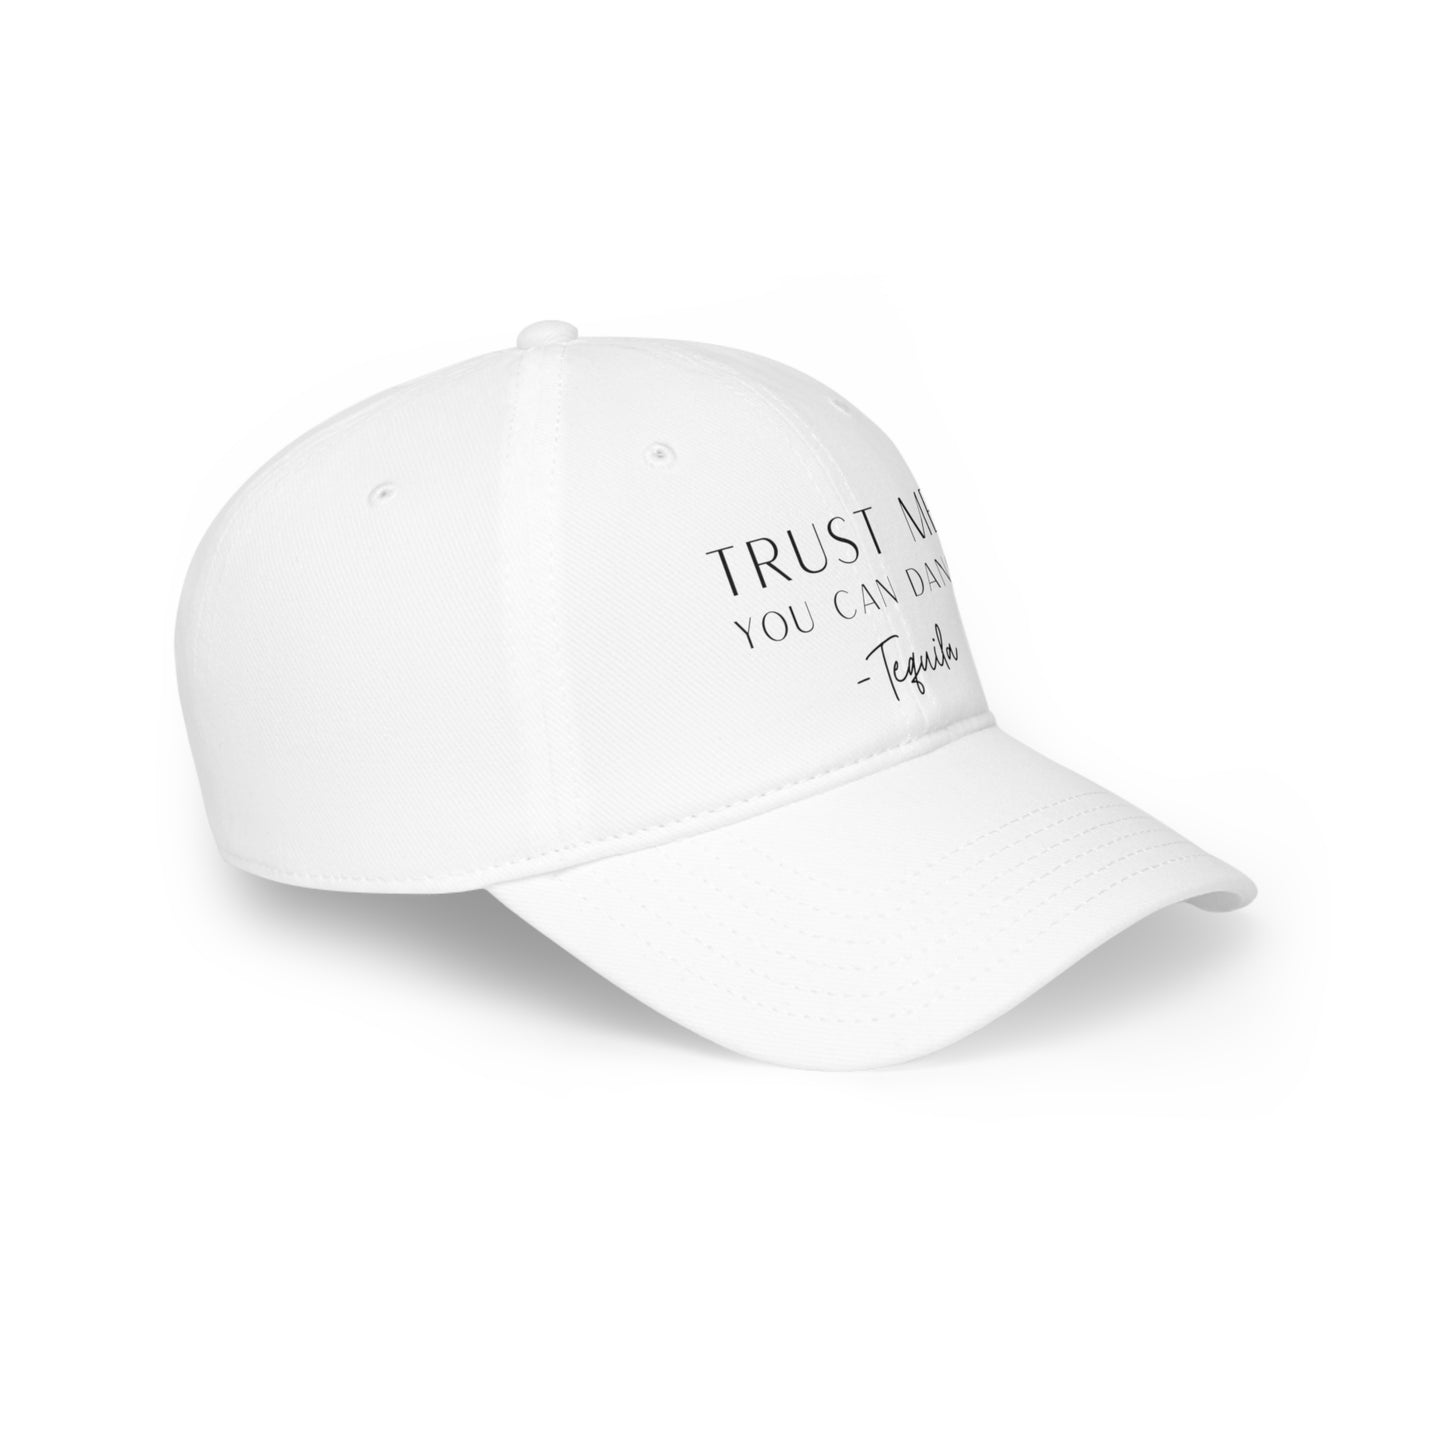 "Trust Me, You Can Dance" Drinking Hat